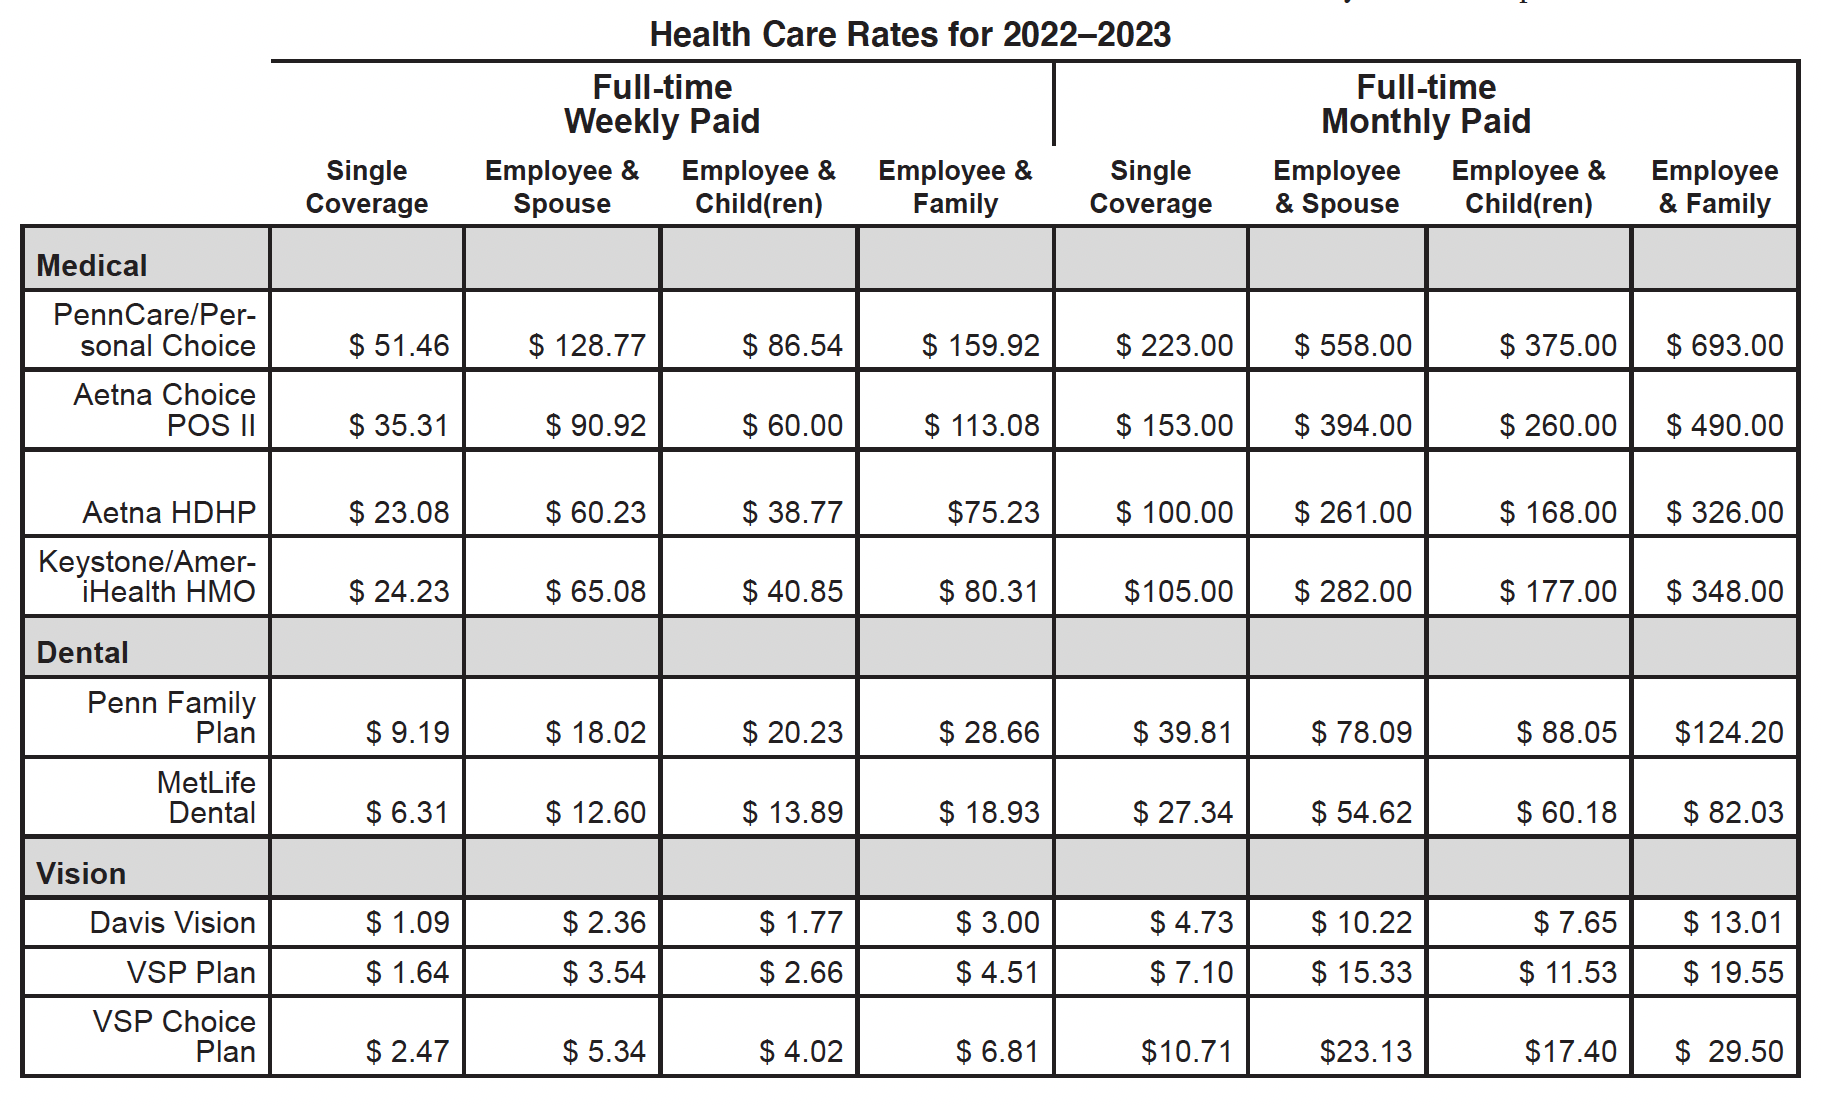 Health Care Rates for 2022-2023